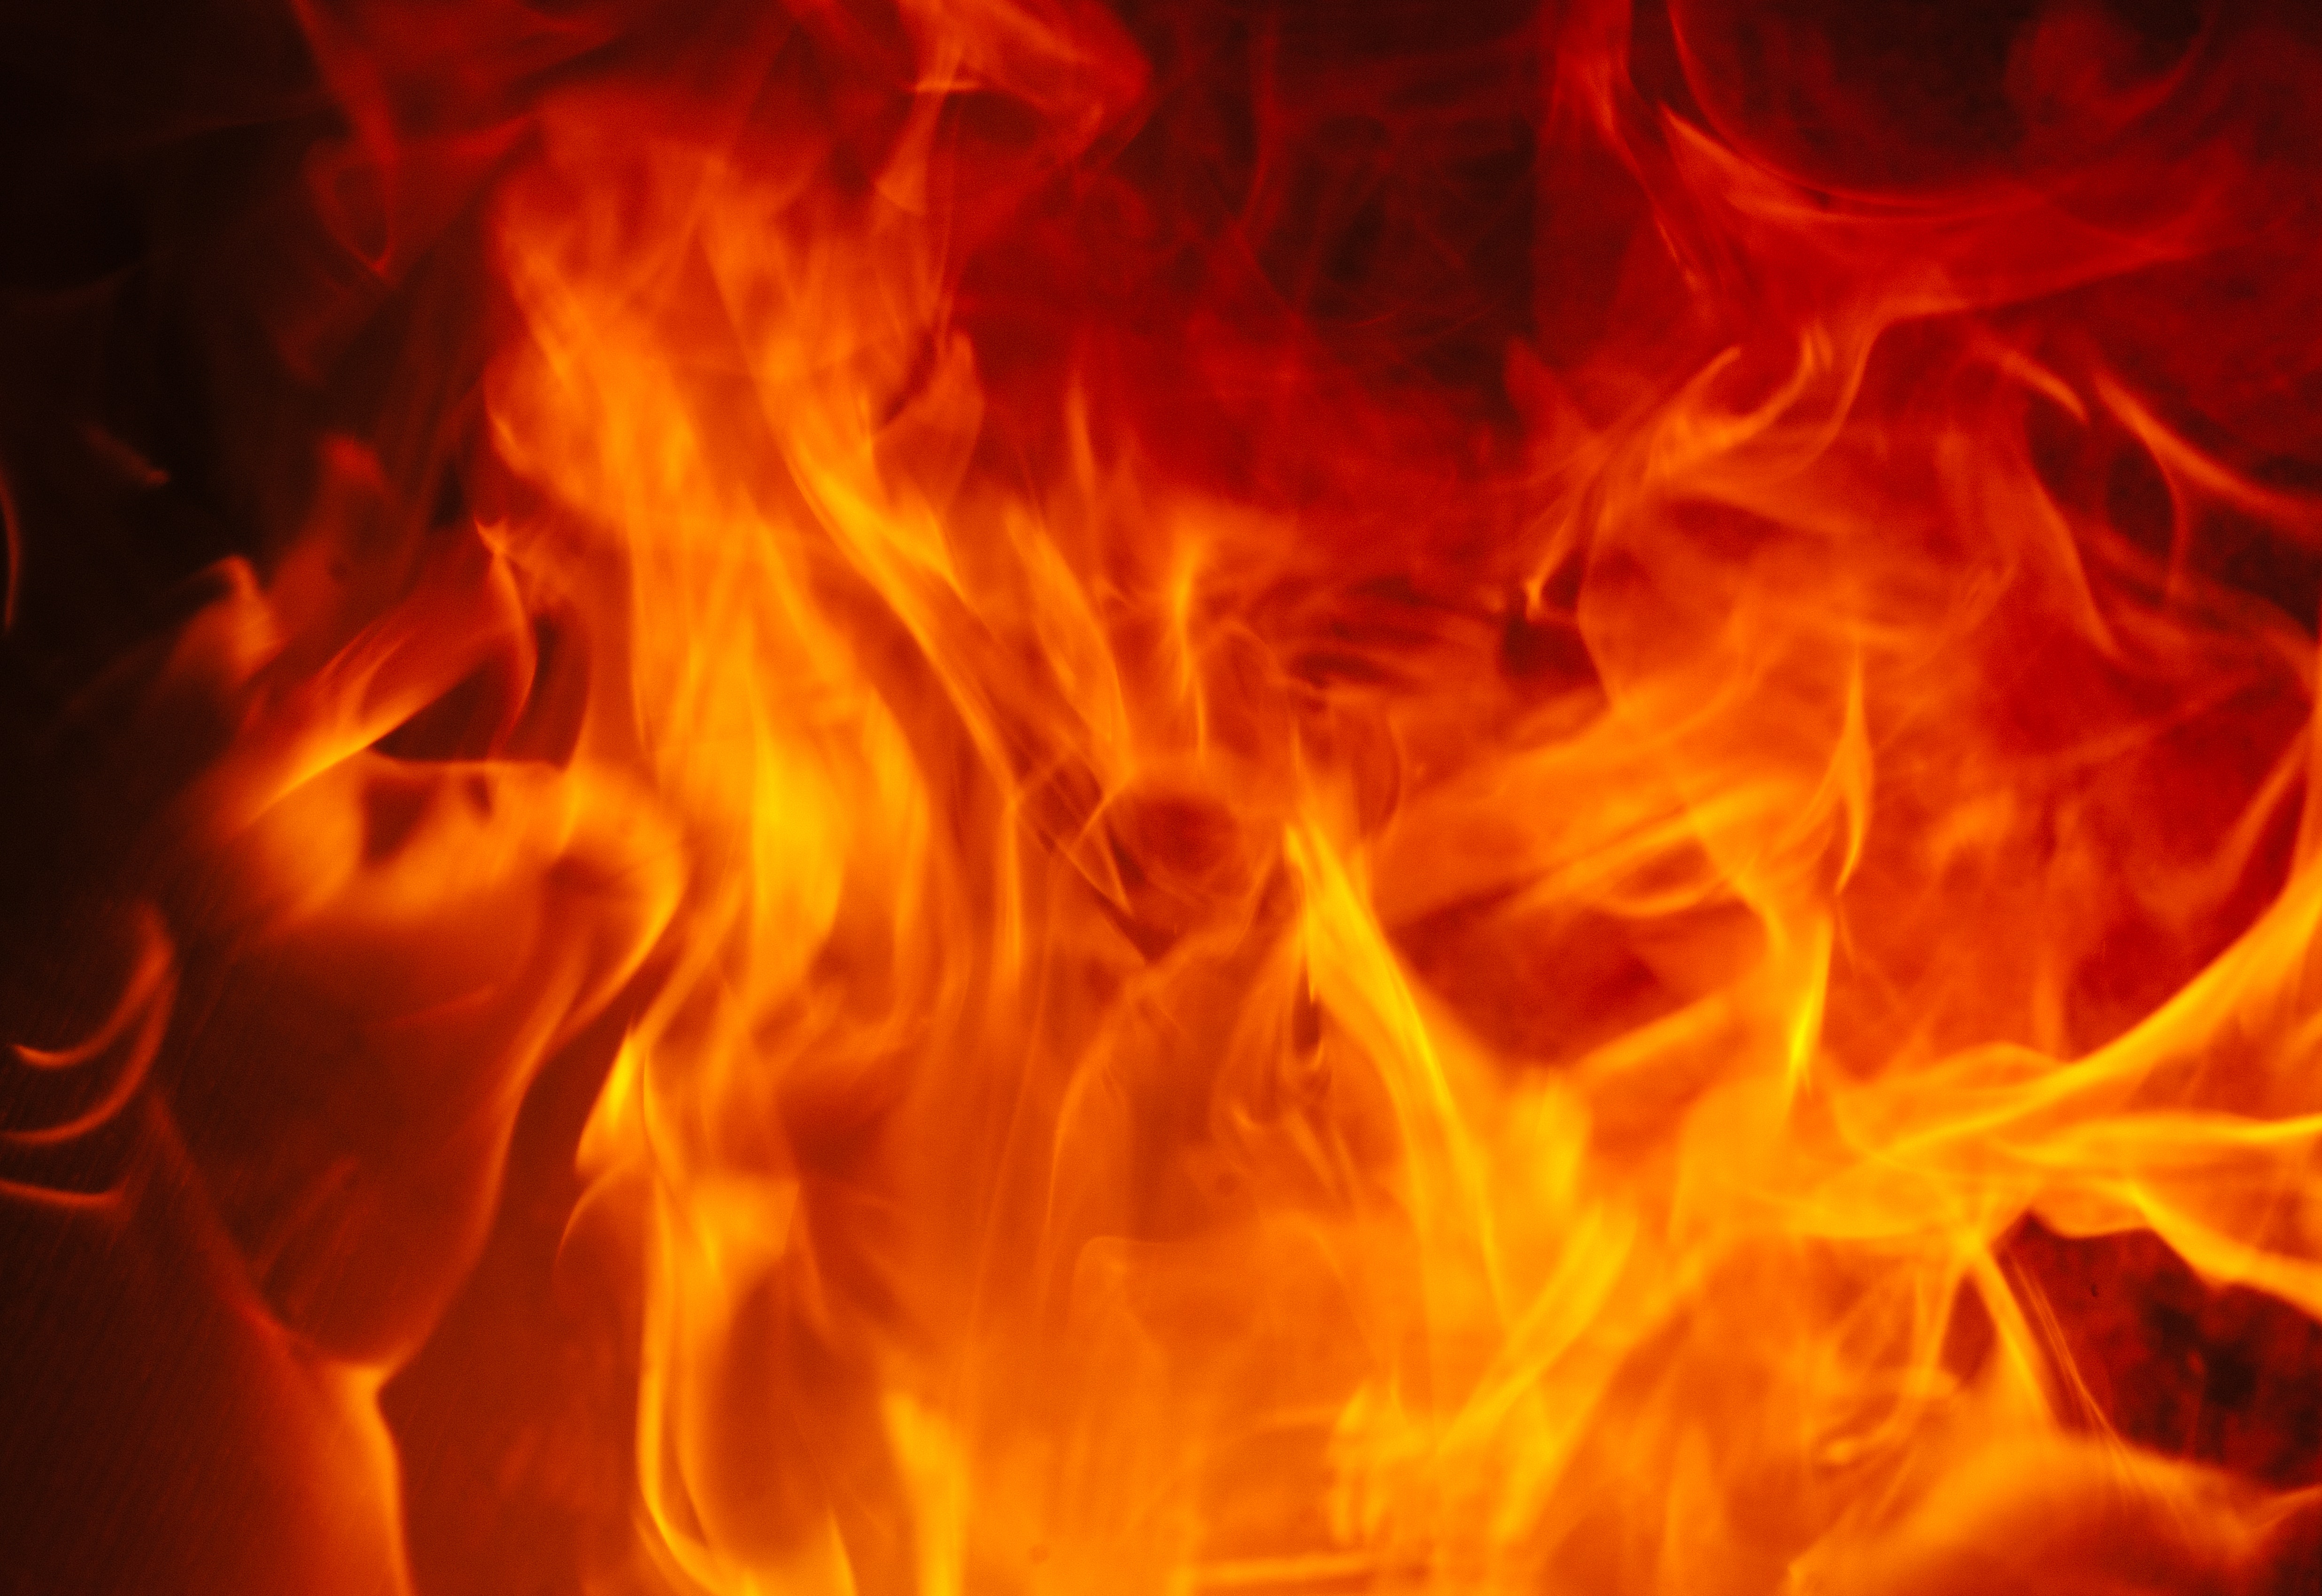 majestic fire powerpoint background